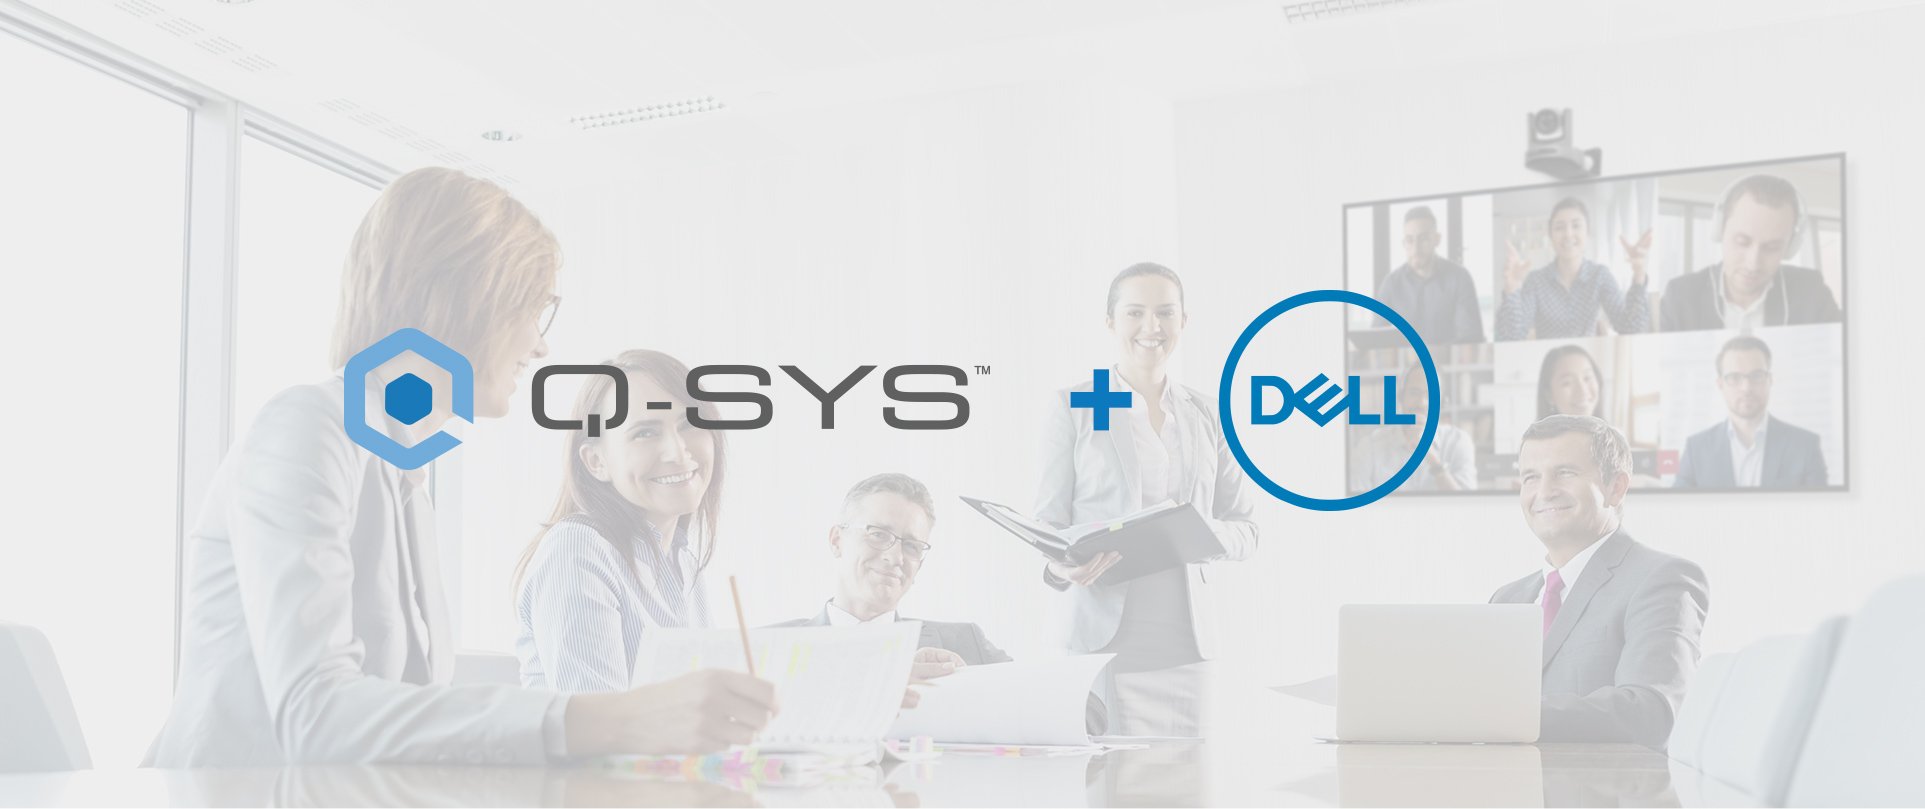 Q-SYS, and Dell logos